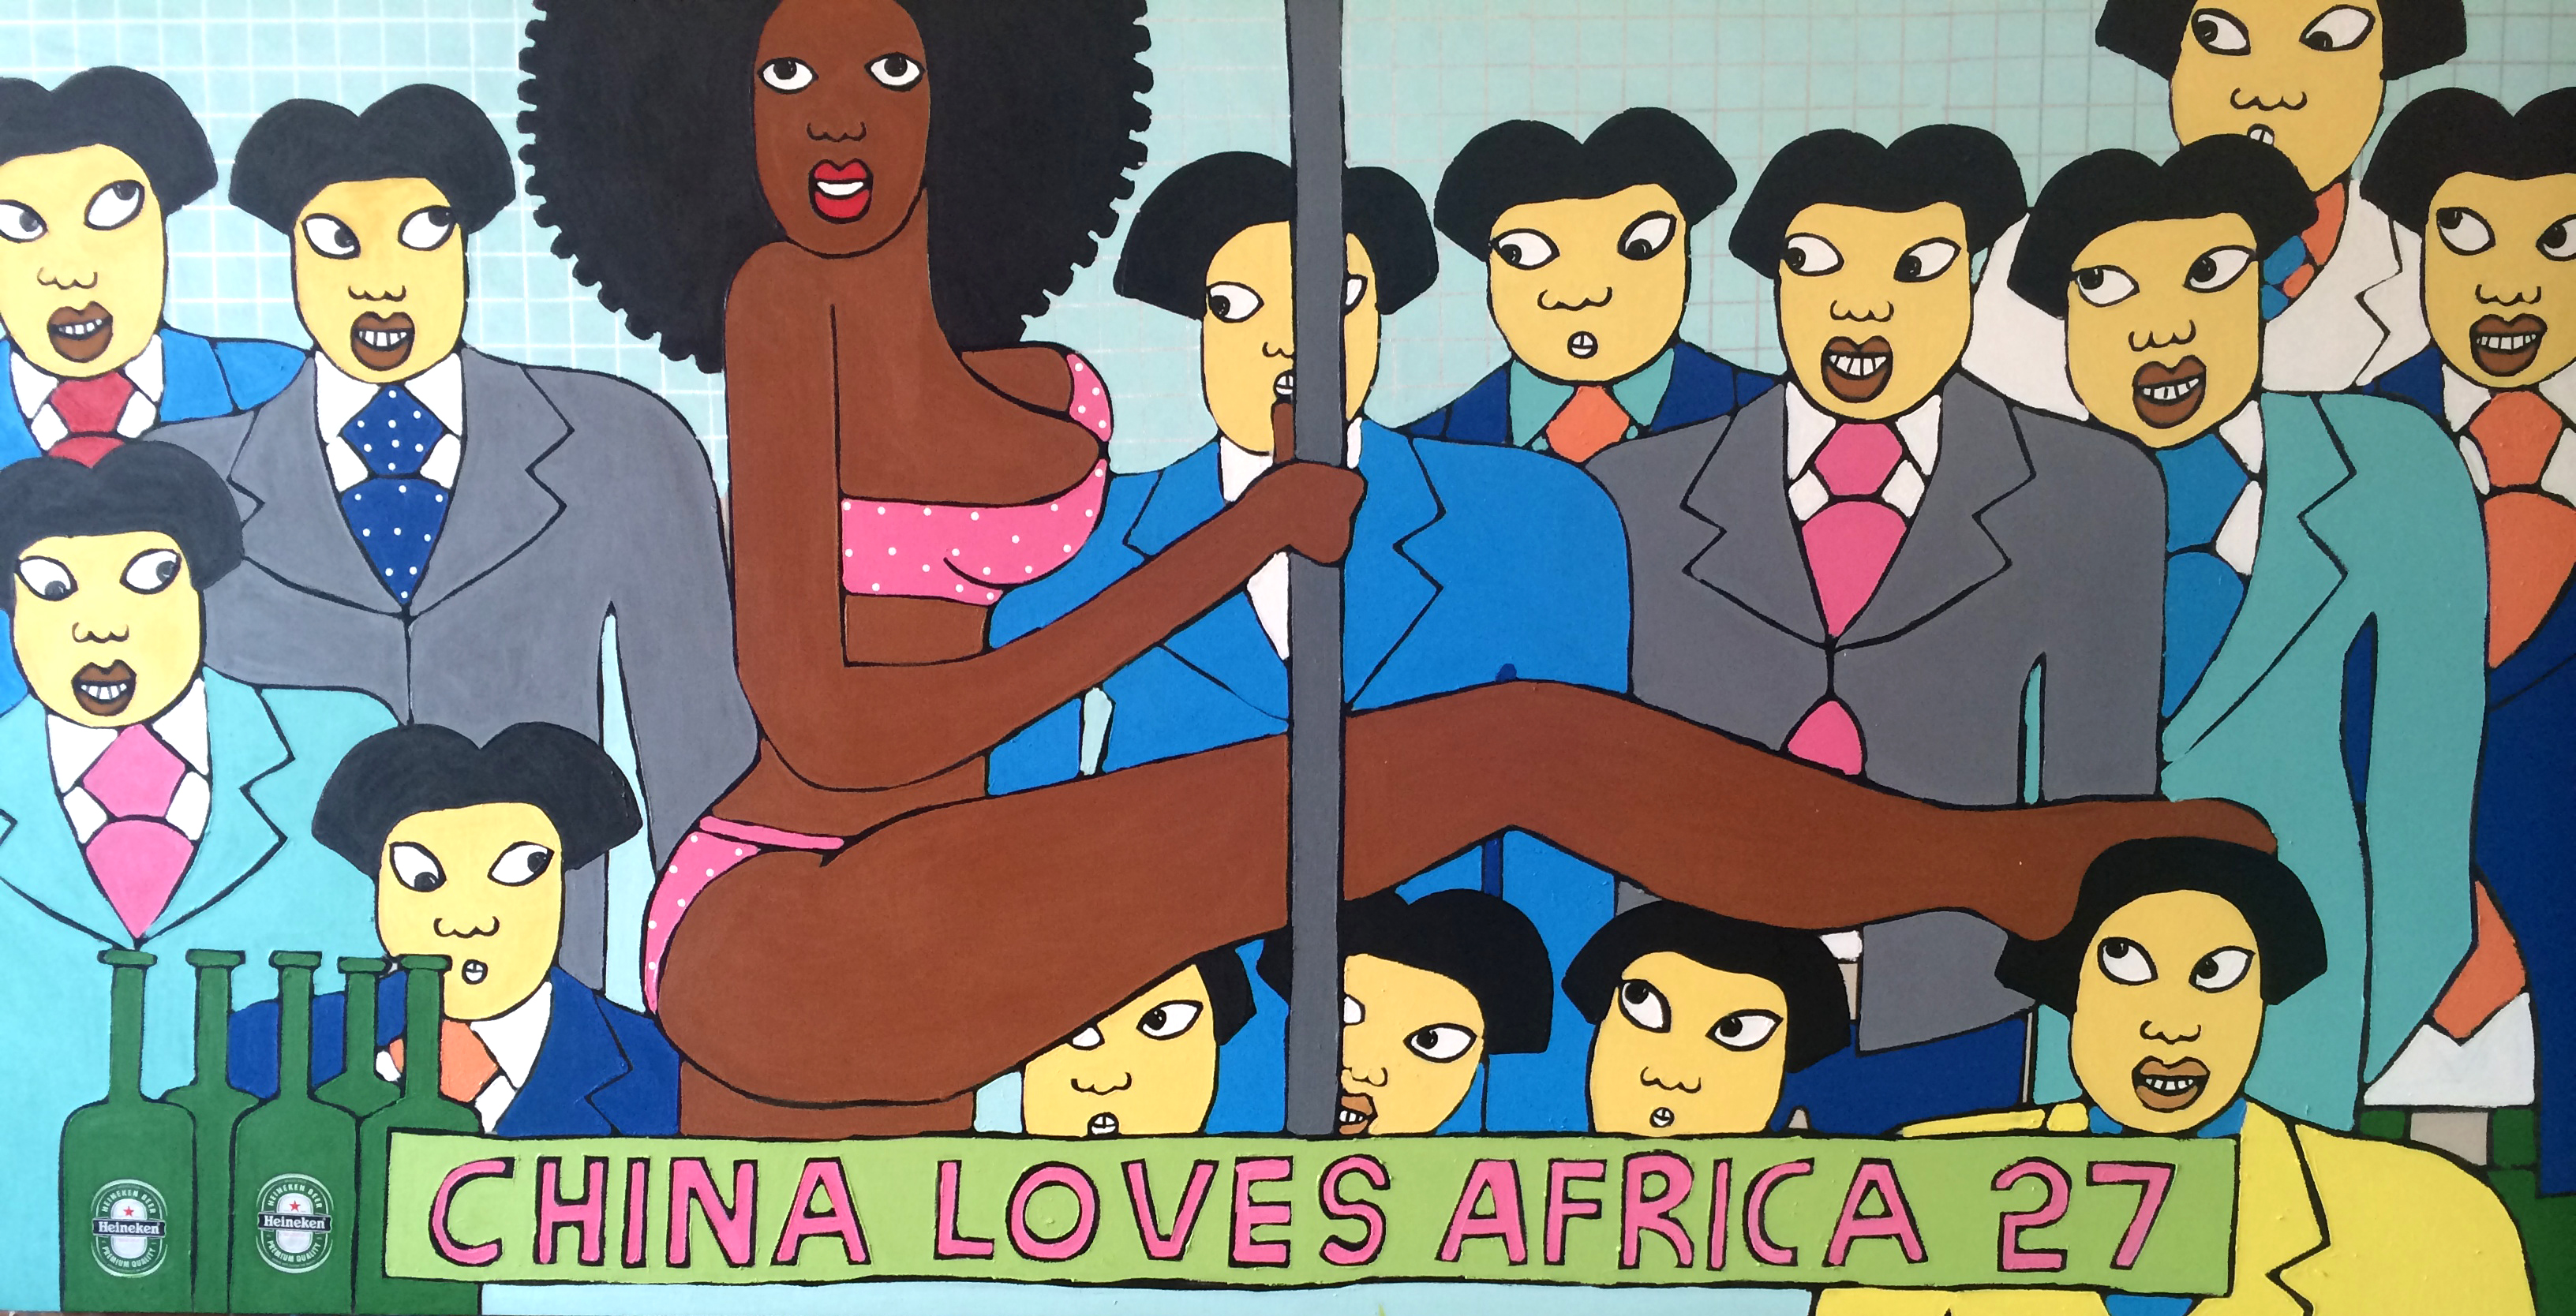 Michael Soi's China Loves Africa #27